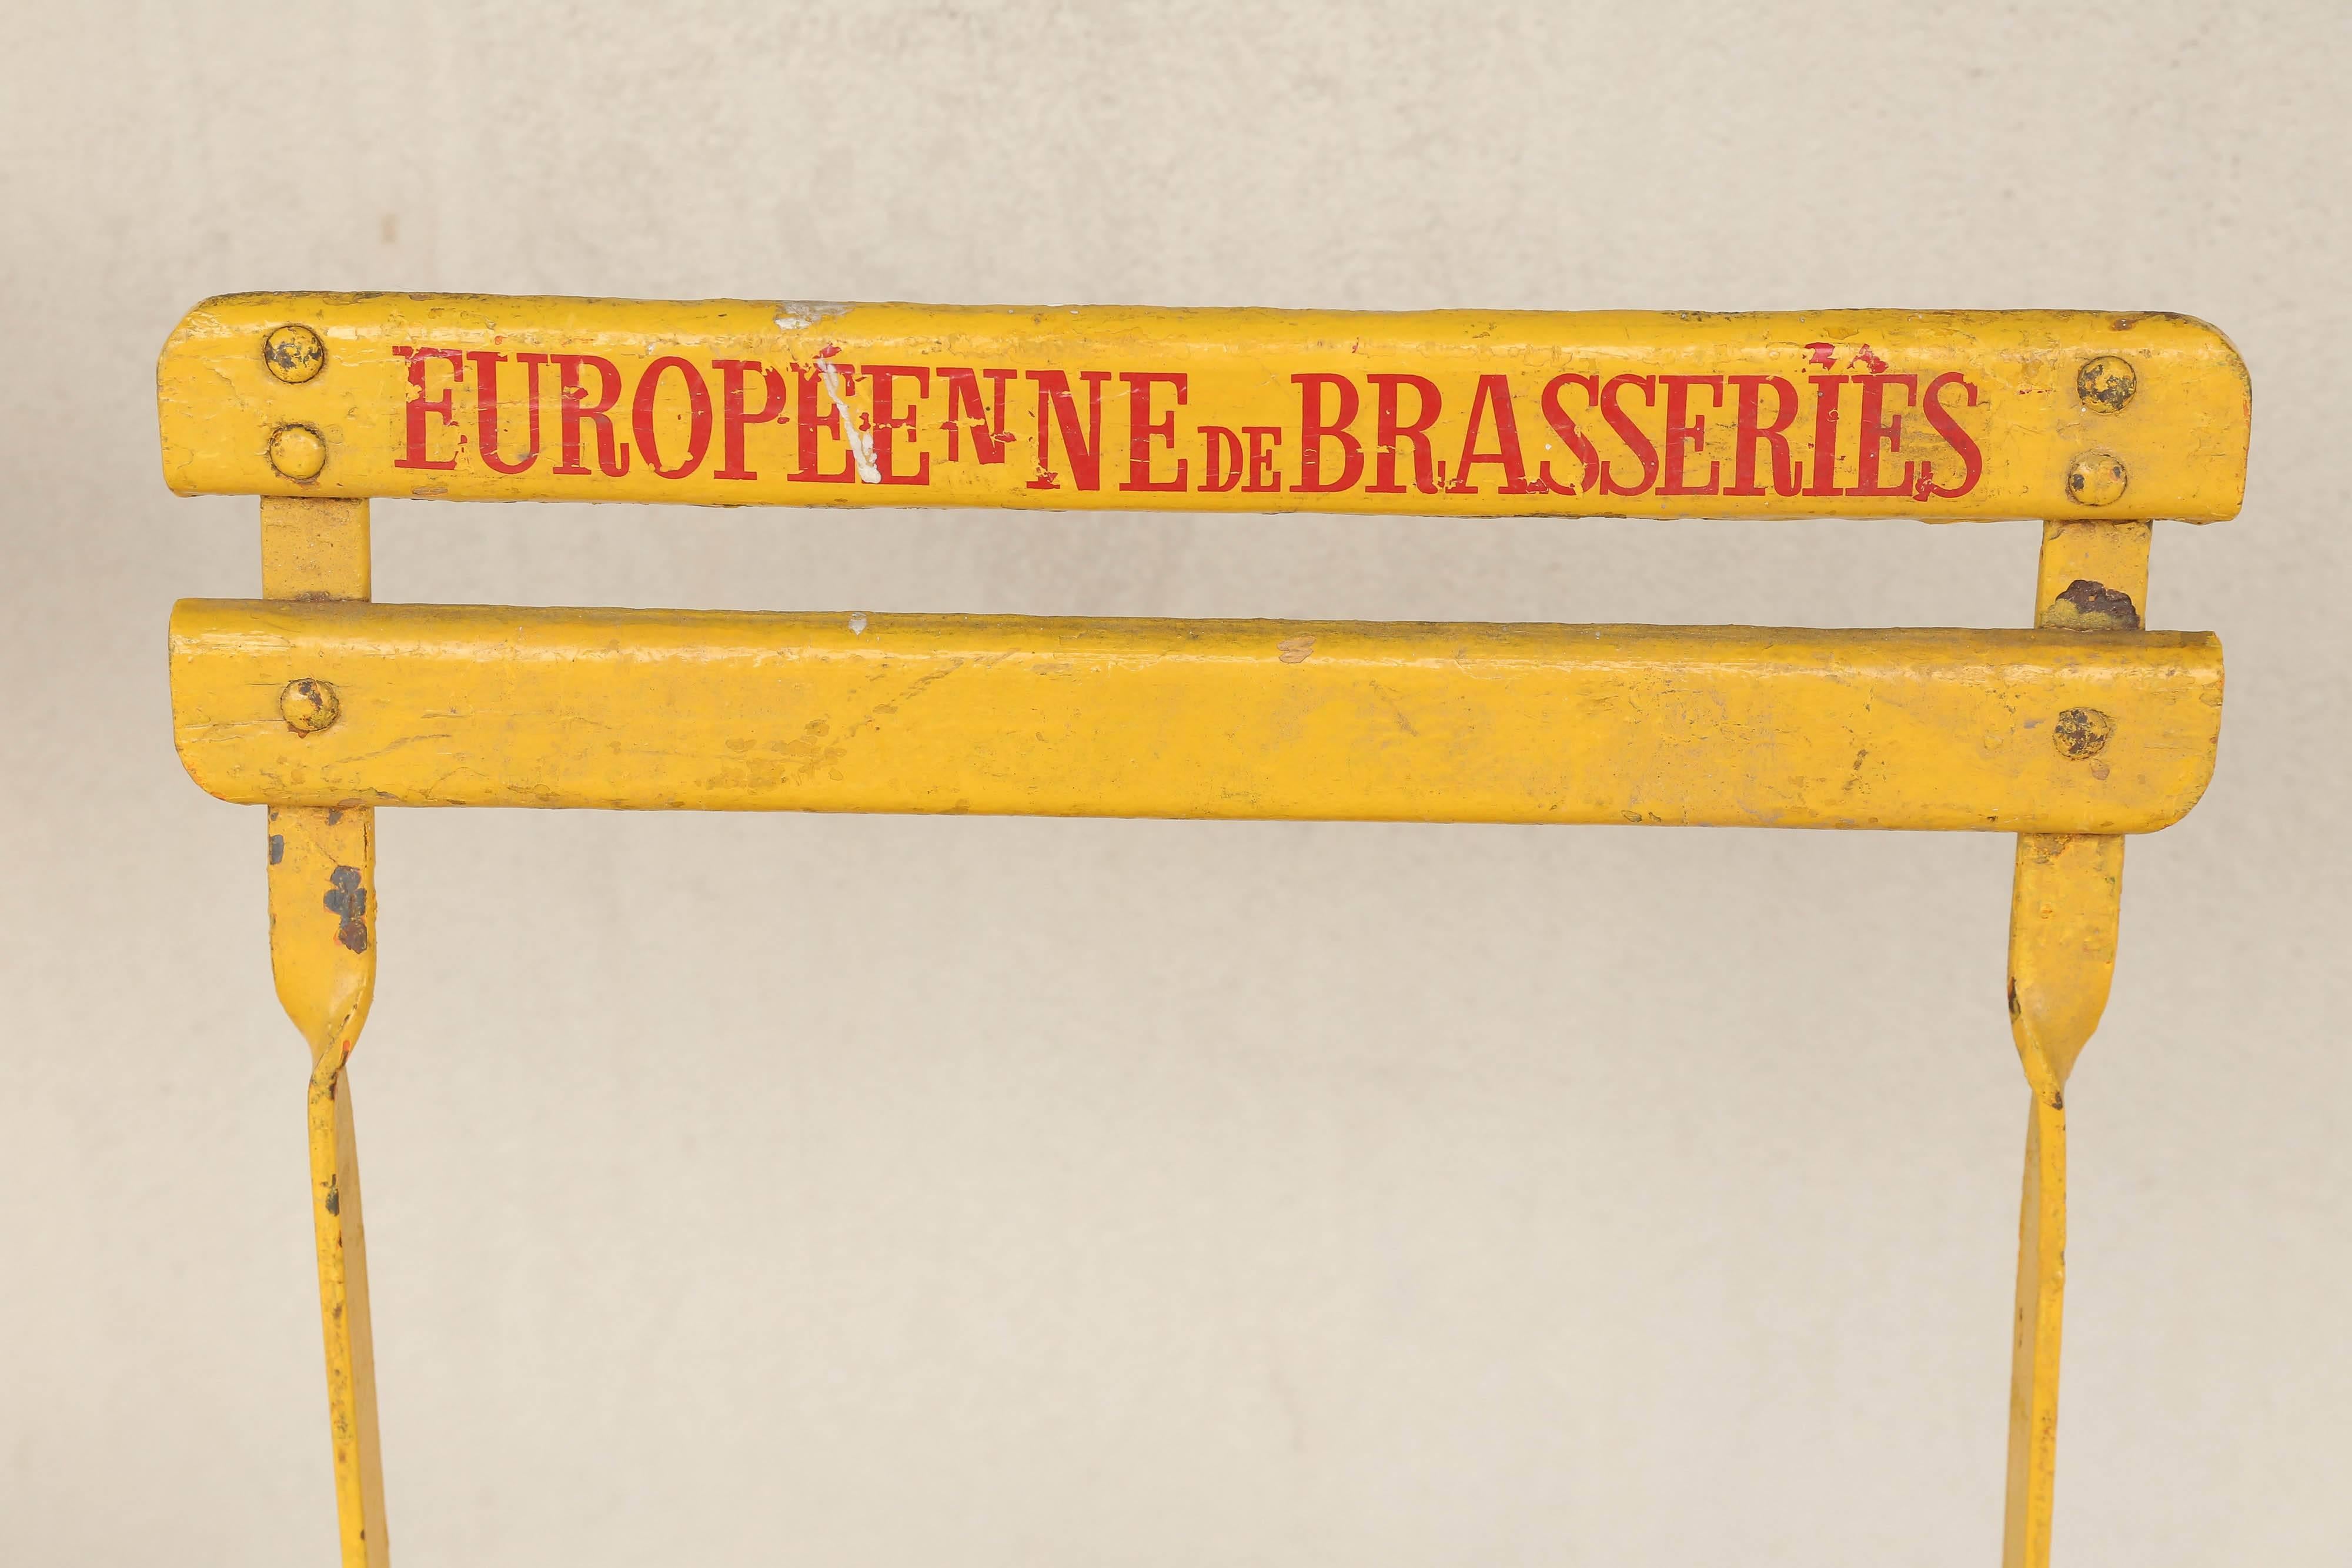 Originally used as Brasserie seating in a Paris cafe, these sturdy folding painted wooden and metal chairs can be used indoors or out. Painted a deep yellow and each has painted "Europeenne de Brasseries" in red on the back and offer a